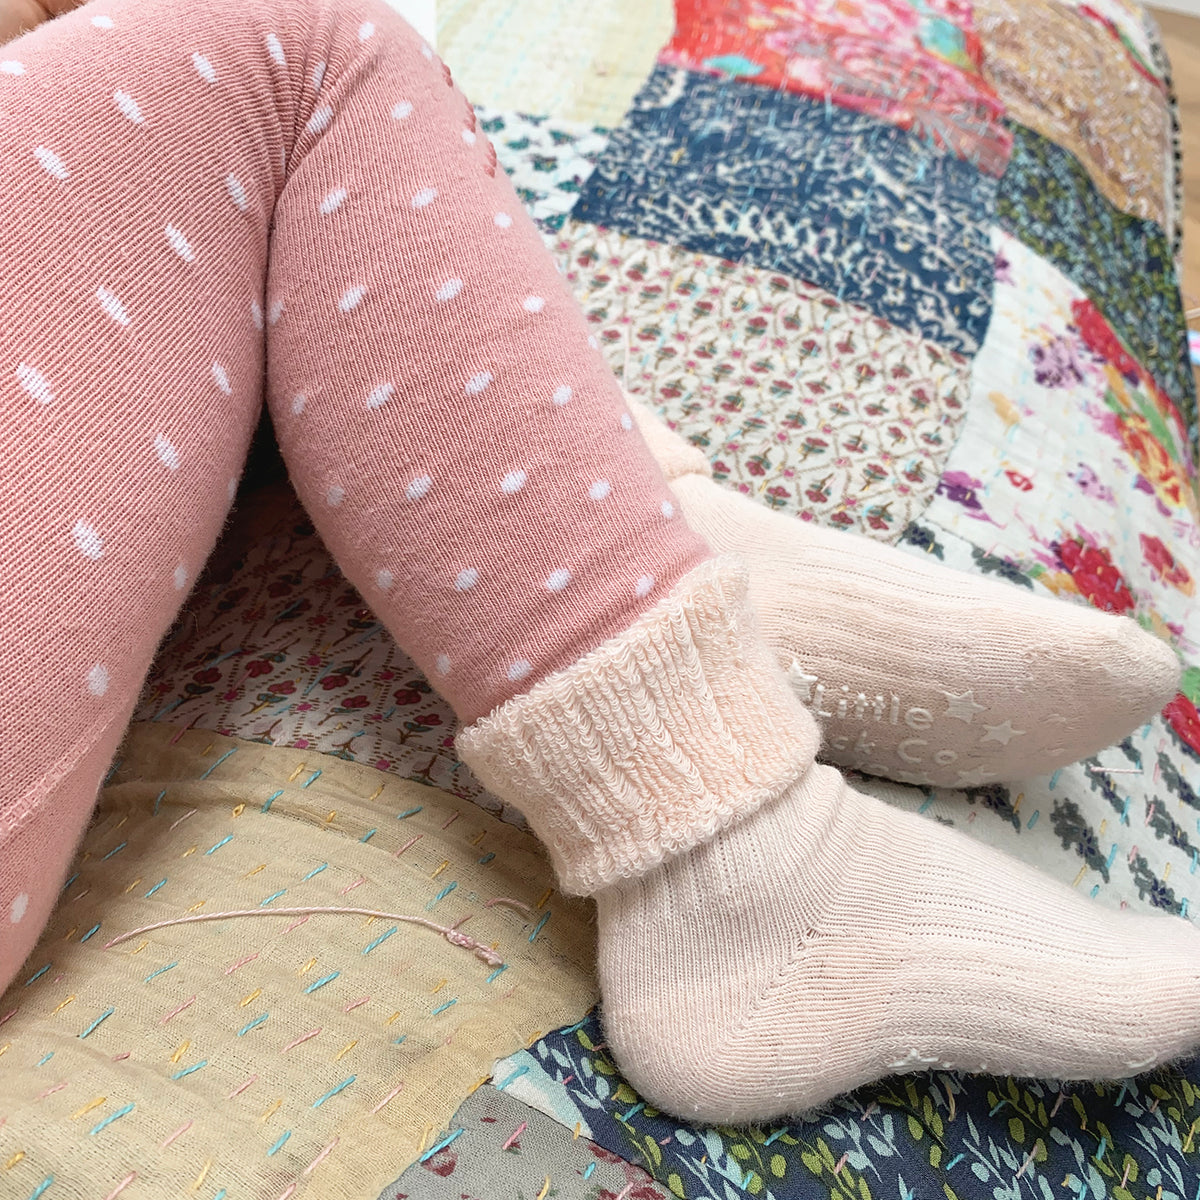 Cosy Stay On Winter Warm Non Slip Baby Socks - 5 Pack in Camille, Cloud Grey and Coral - 0-2 years